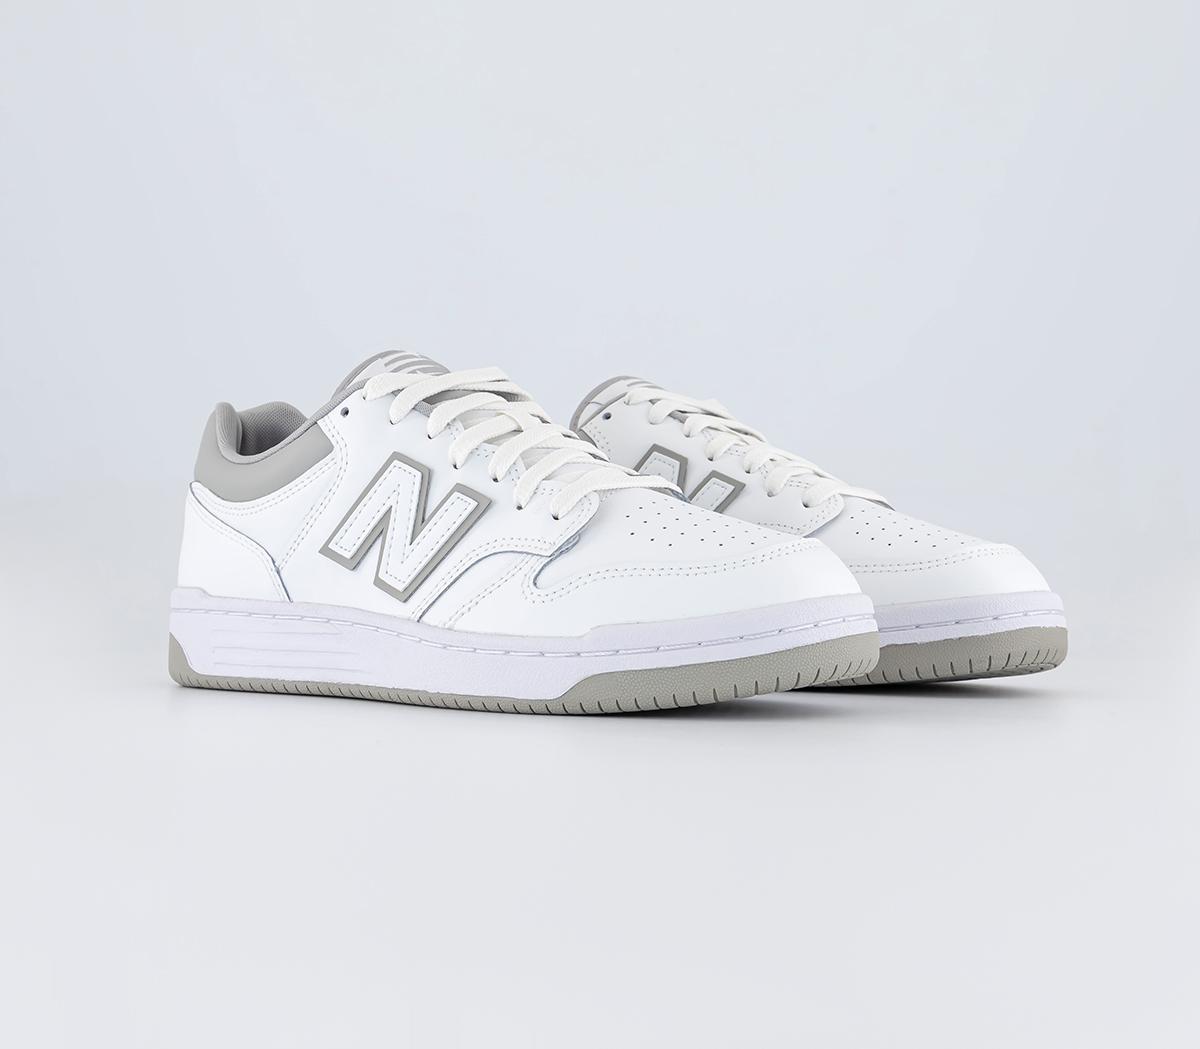 New Balance BB480 Trainers White Grey - Men's Trainers